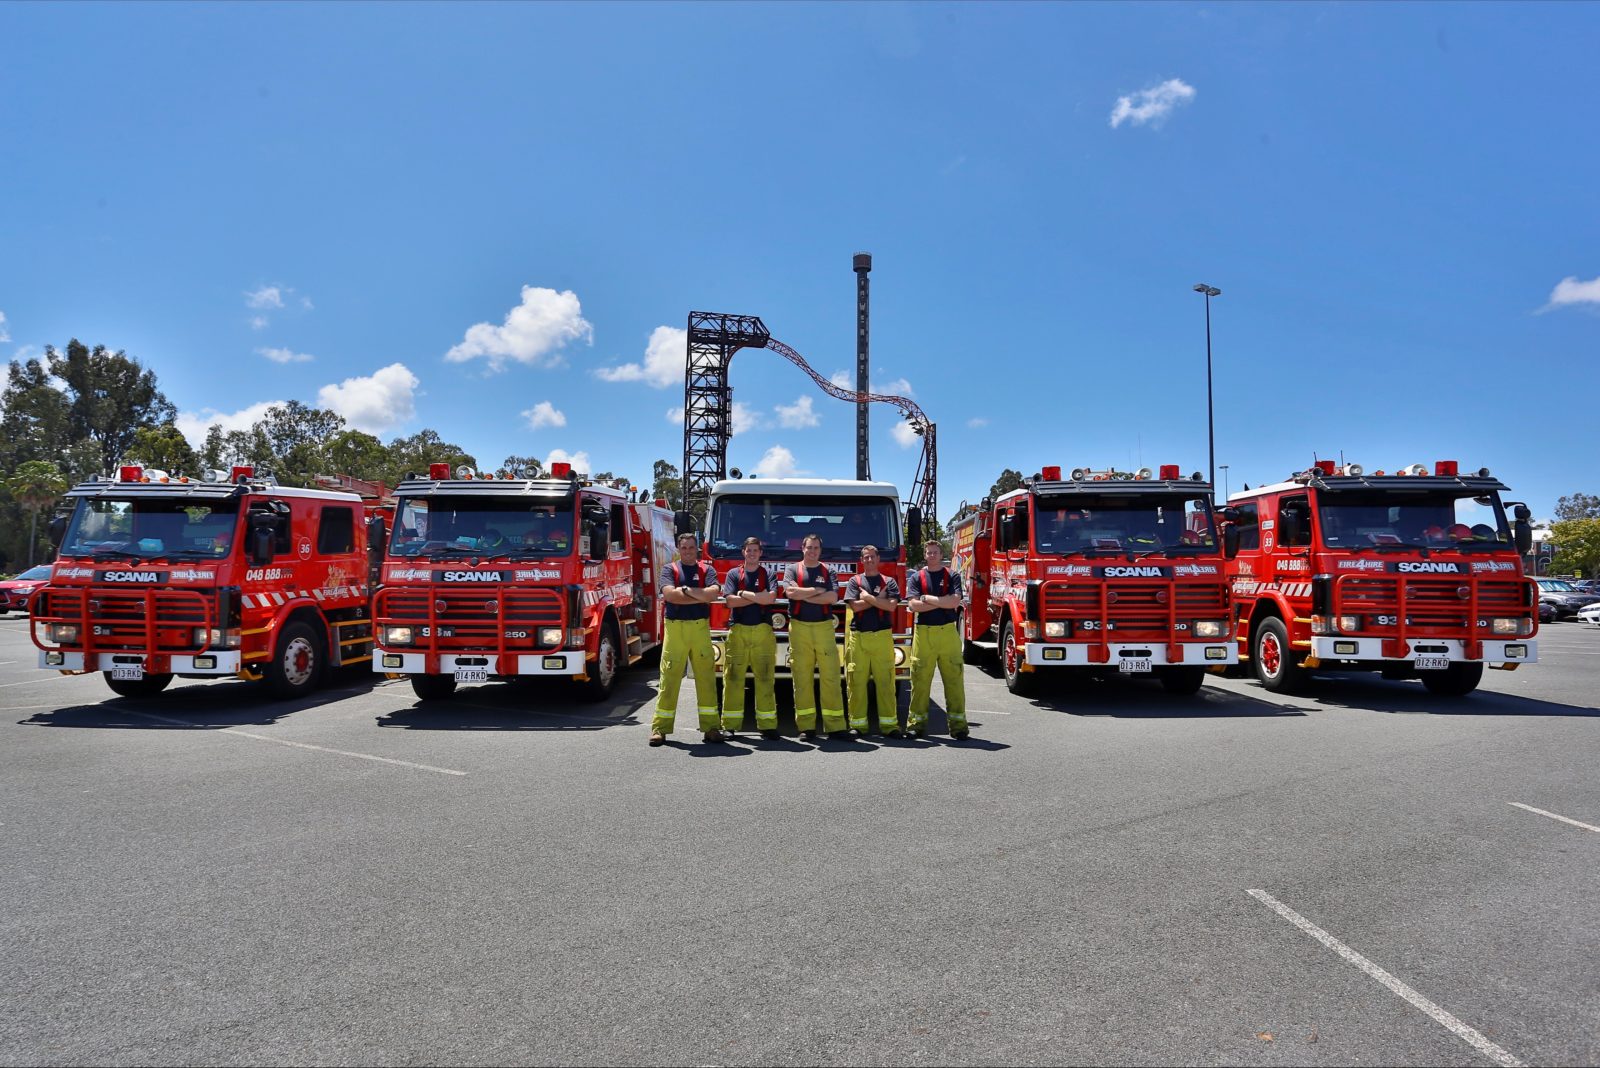 Fire trucks & firefighters available for tourism transport, airports, hotels, theme parks.